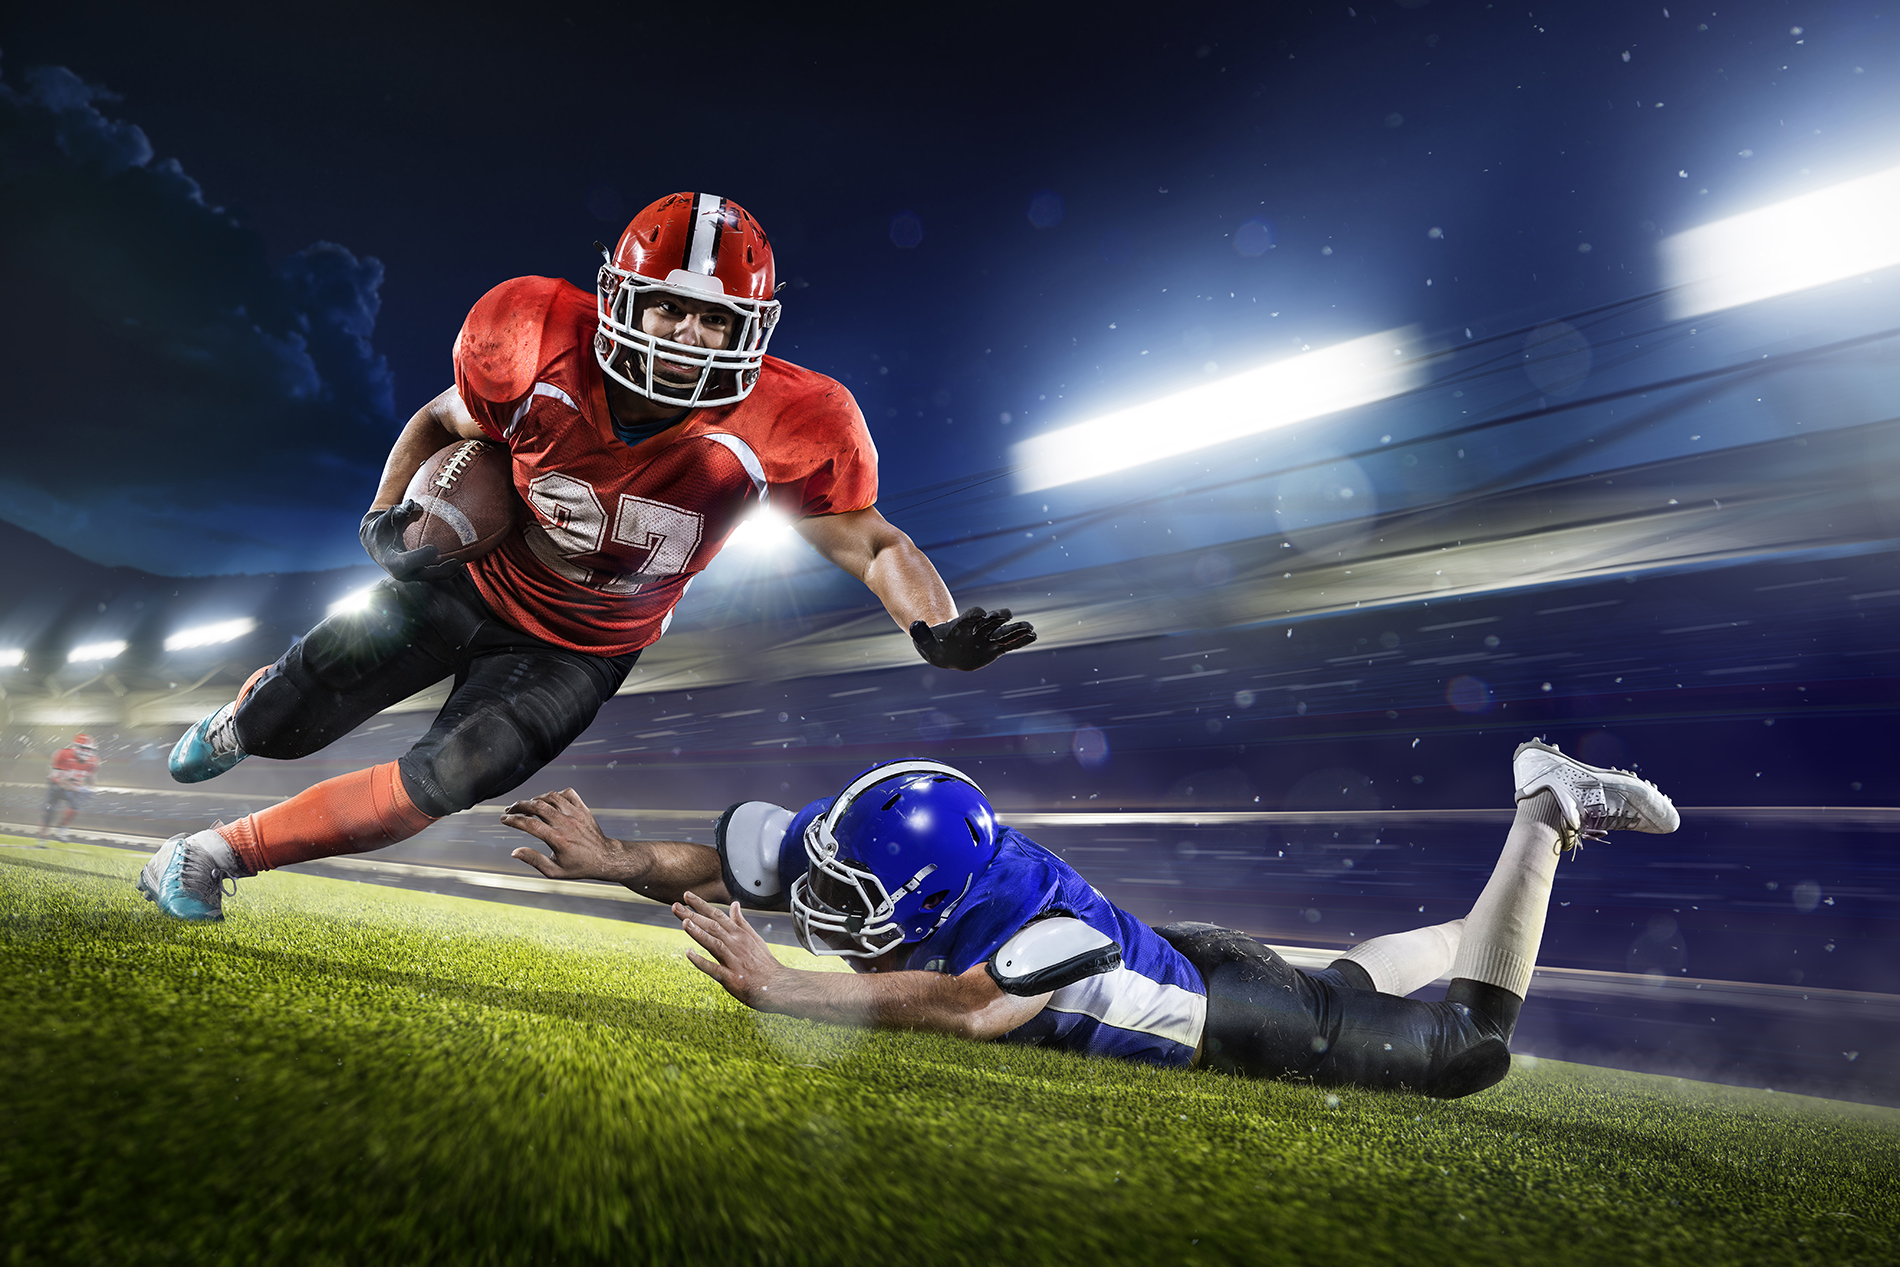 Football Competition For Athletes - Stock Photos Of Football Players - HD Wallpaper 